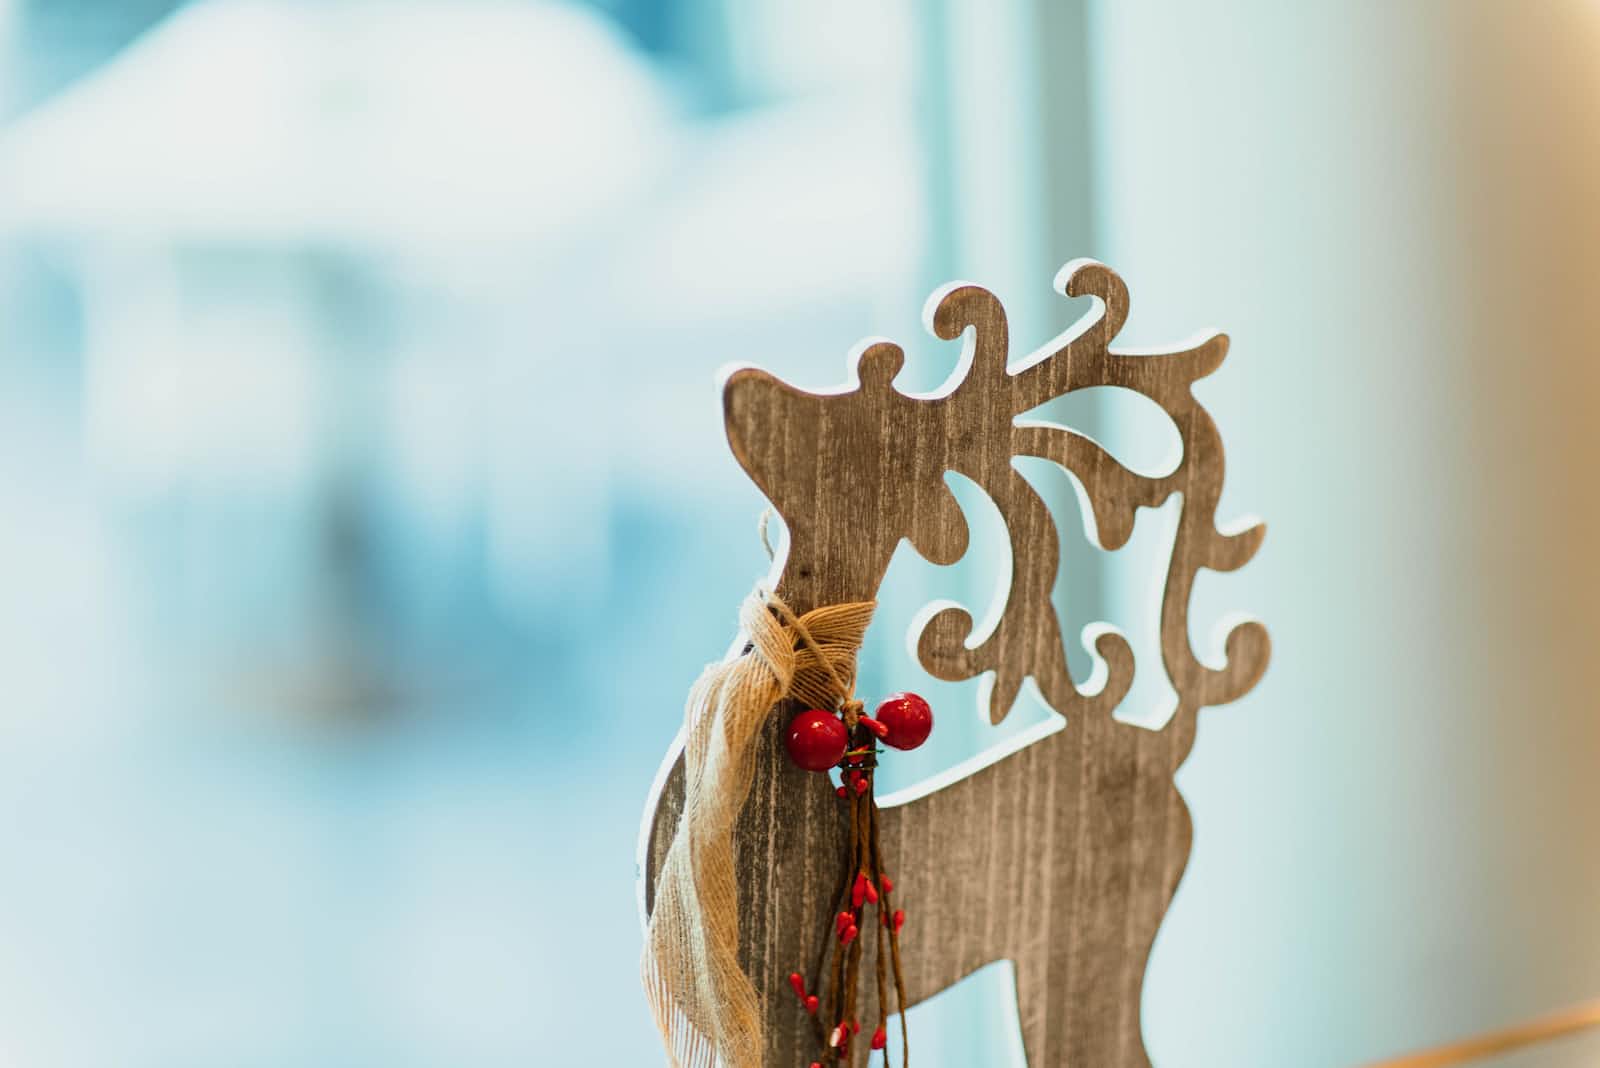 A Christmas reindeer ornament made of wood